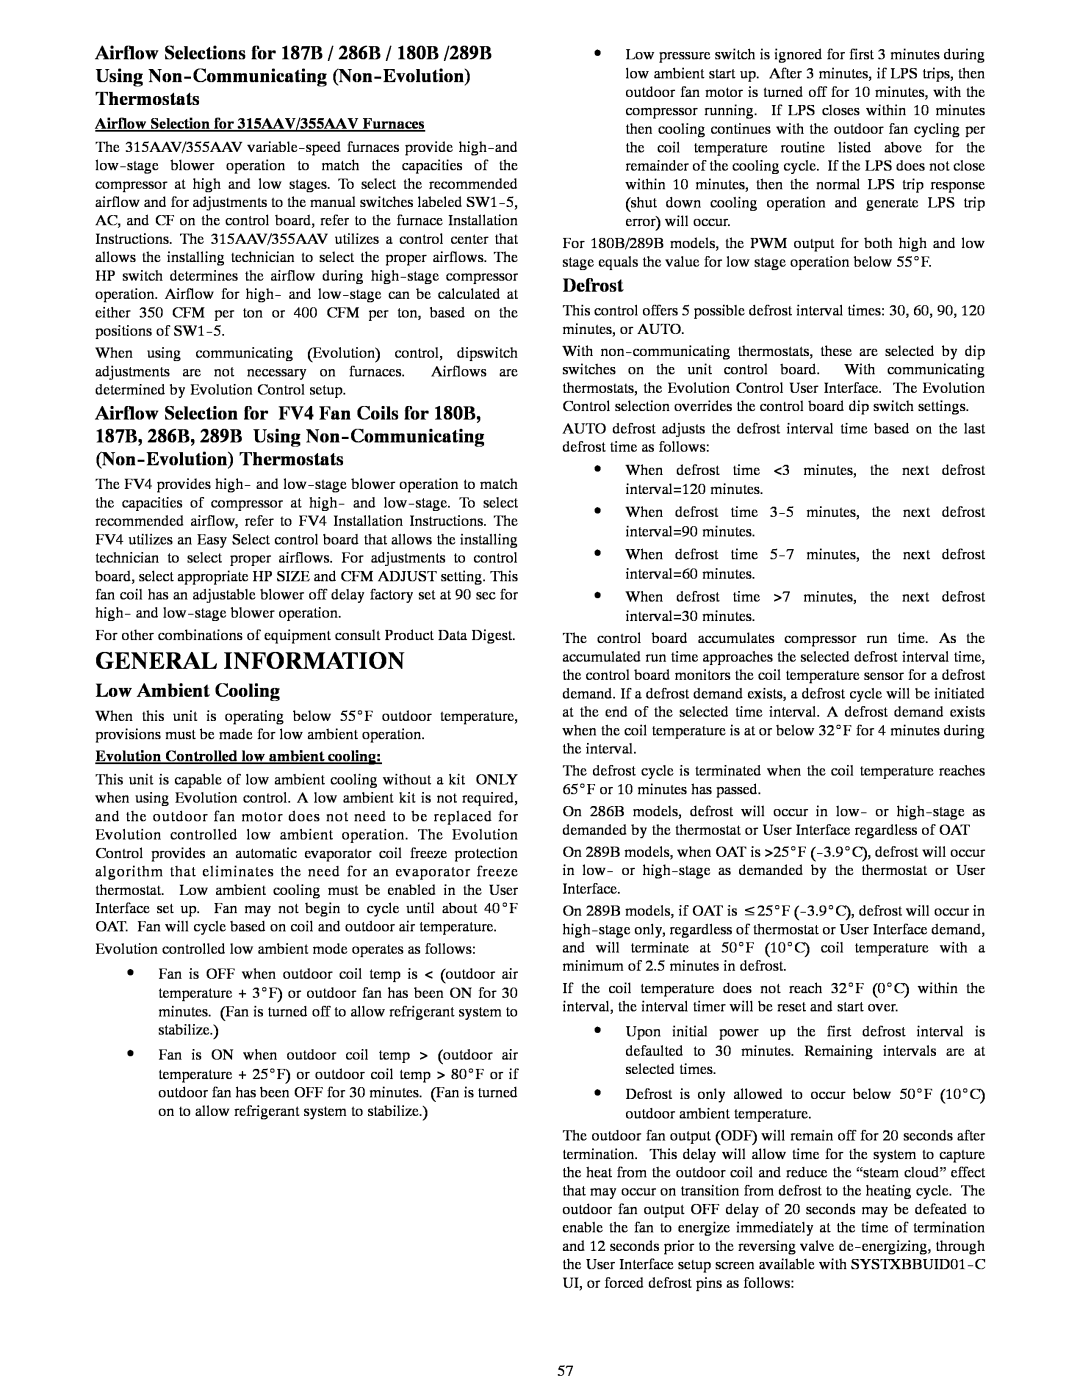 Bryant R-22 service manual General Information, Low Ambient Cooling, Defrost, Airflow Selection for 315AAV/355AAV Furnaces 